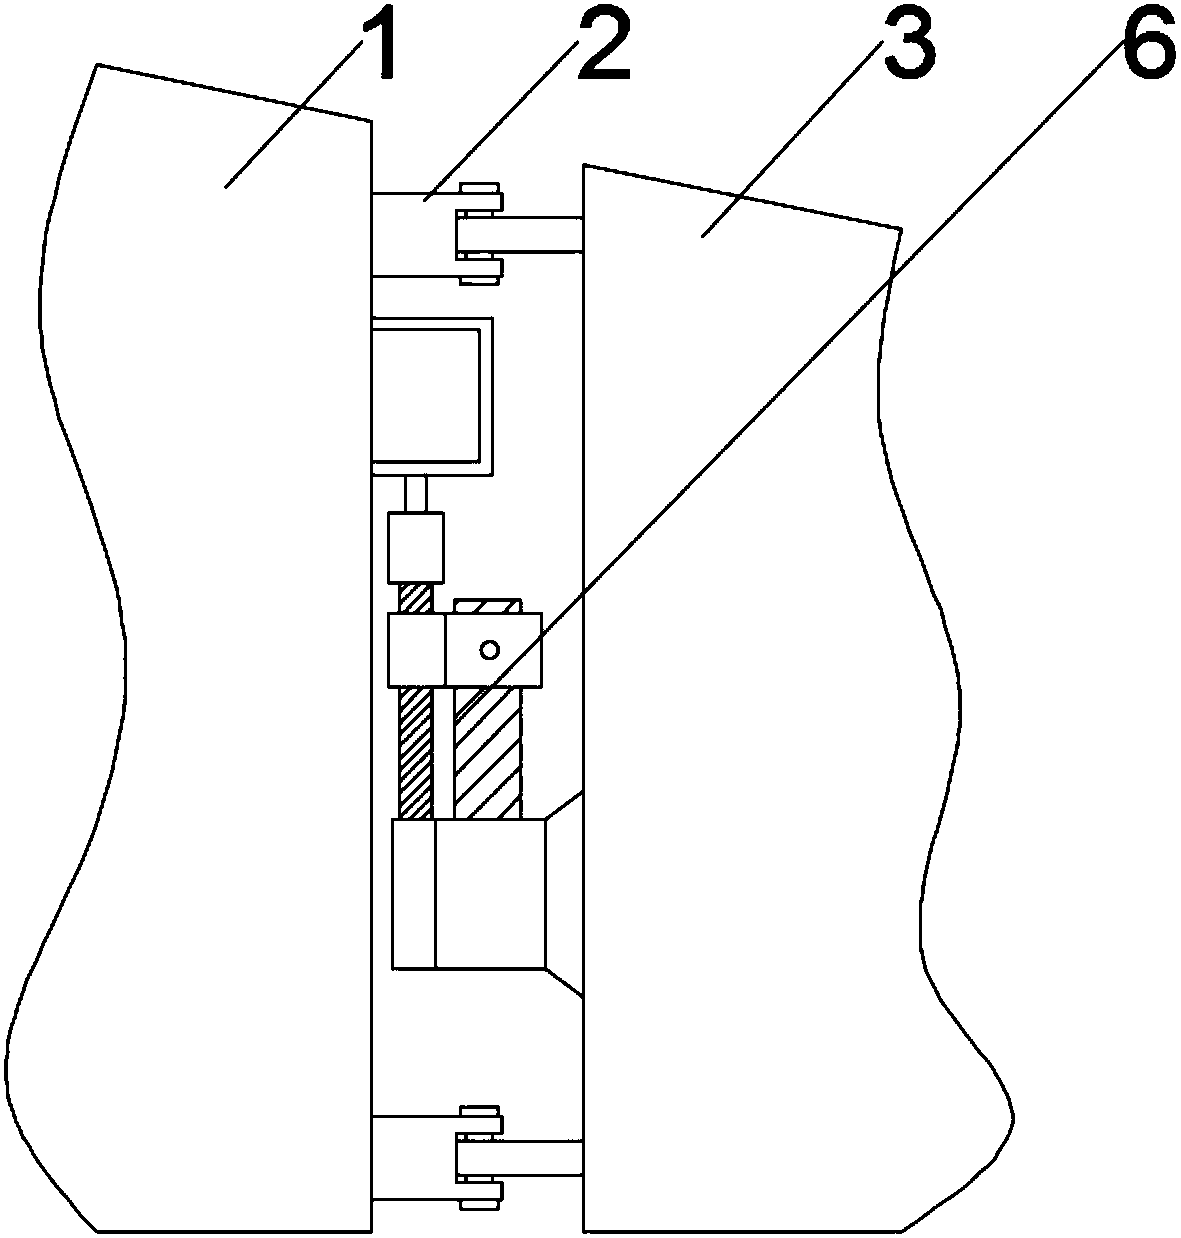 Folding and unfolding mechanism for outer wing of aircraft